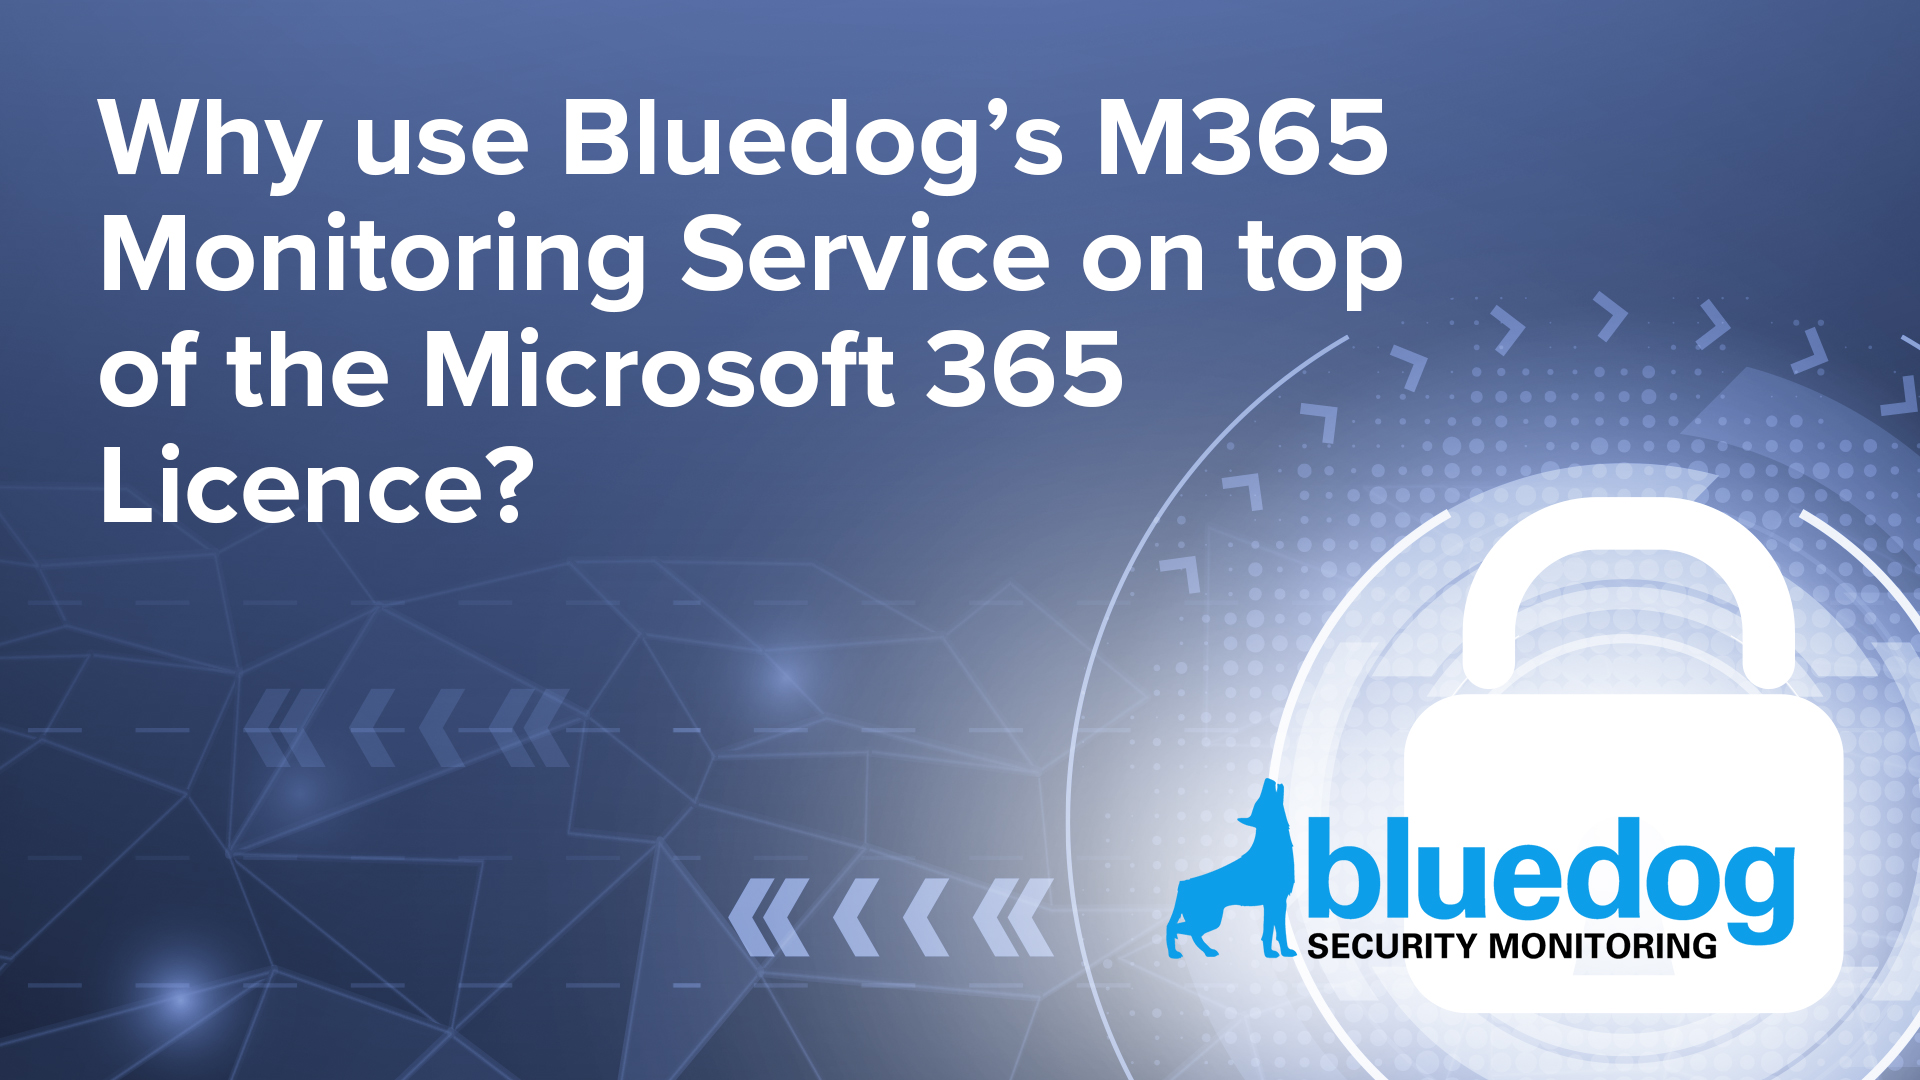 Why use Bluedog’s M365 Monitoring Service on top of the Microsoft 365 Licence?